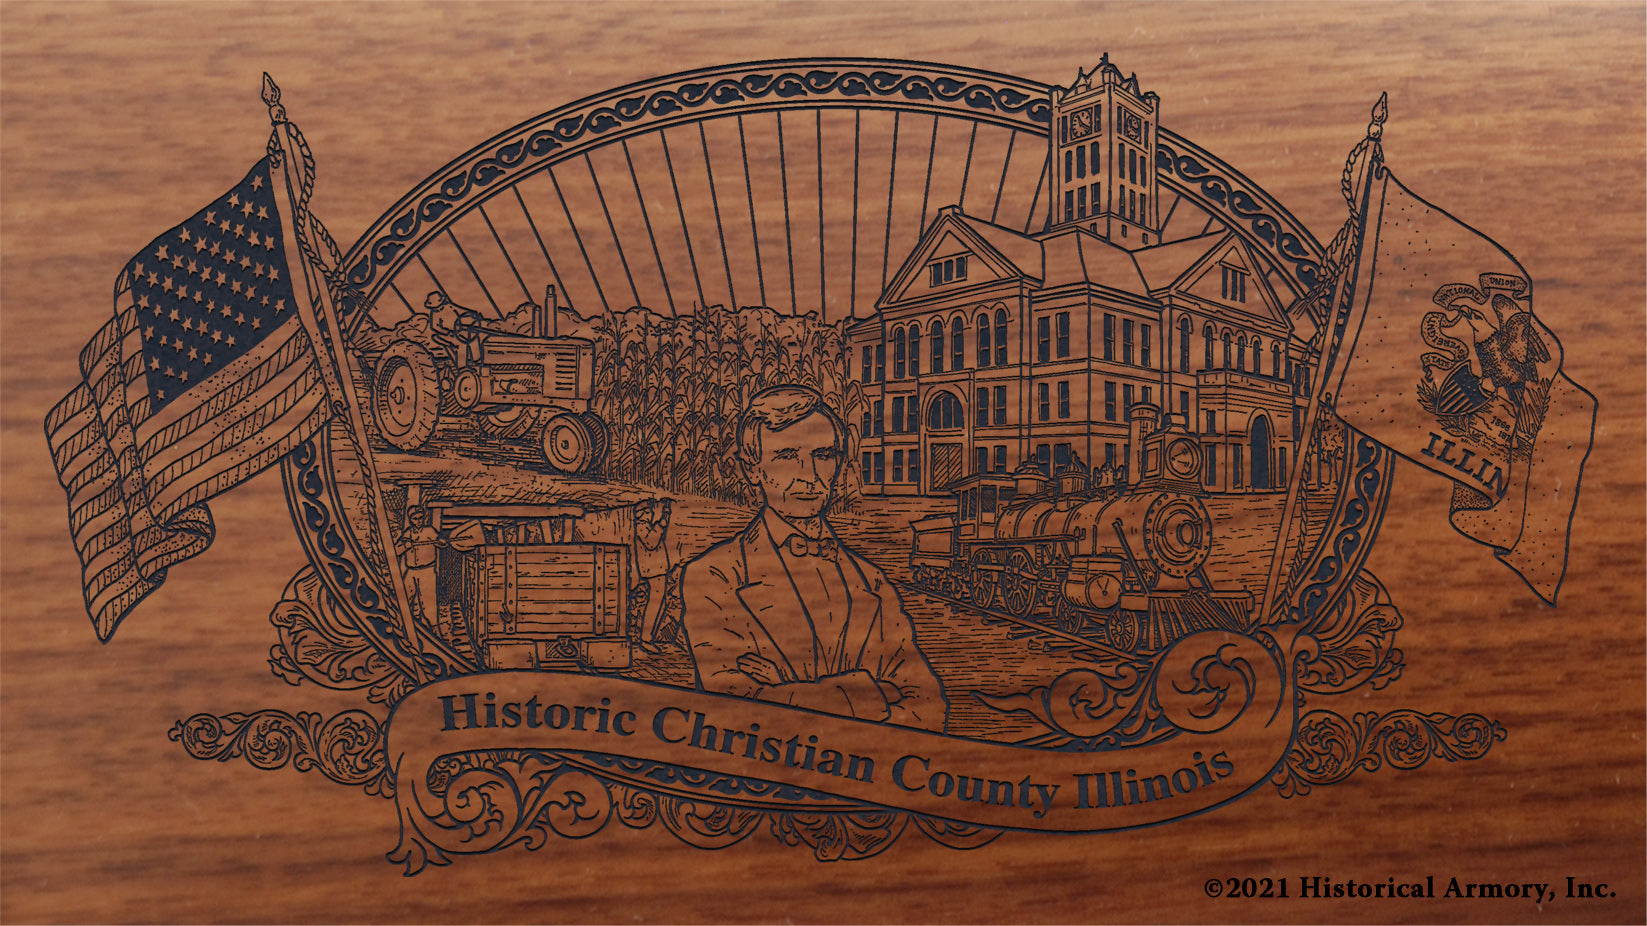 Engraved artwork | History of Christian County Illinois | Historical Armory